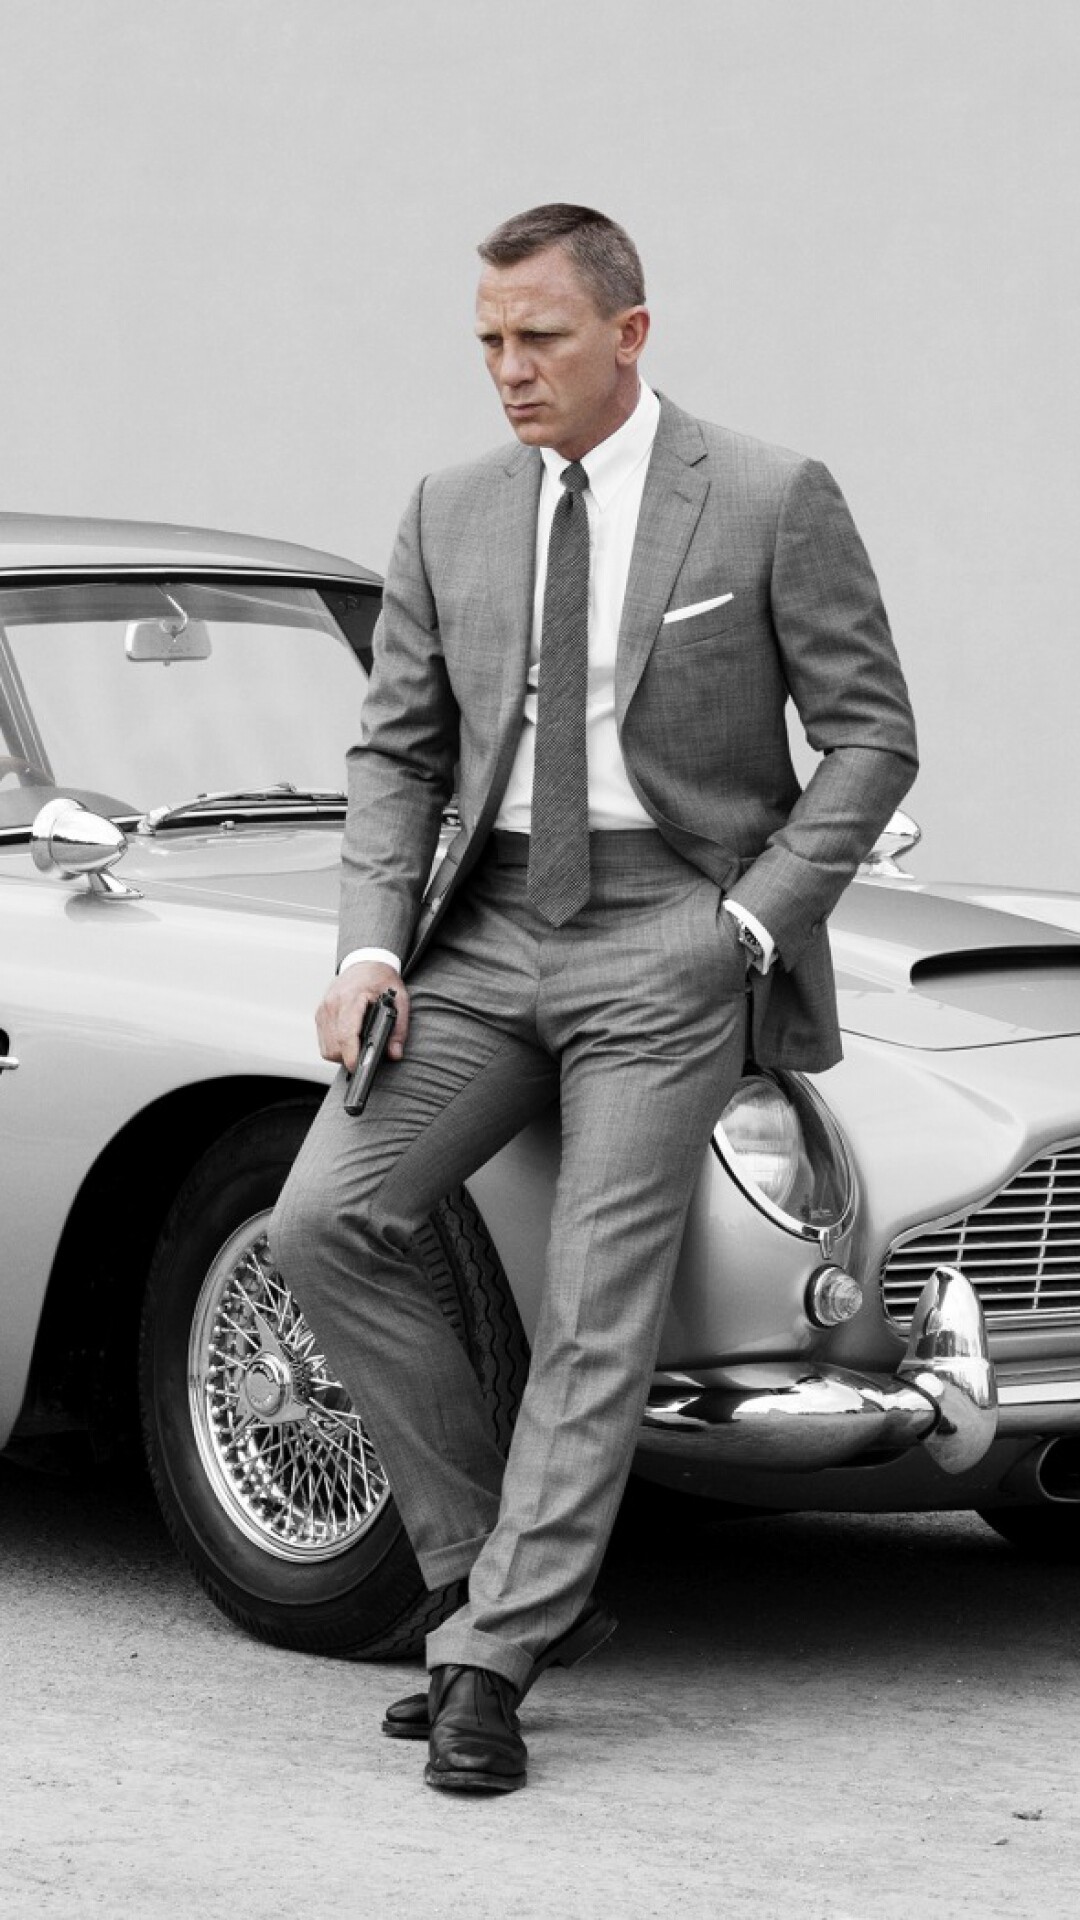 James Bond: Spectre, MI6 agent. The second-highest grossing 007 film after Skyfall. 1080x1920 Full HD Background.